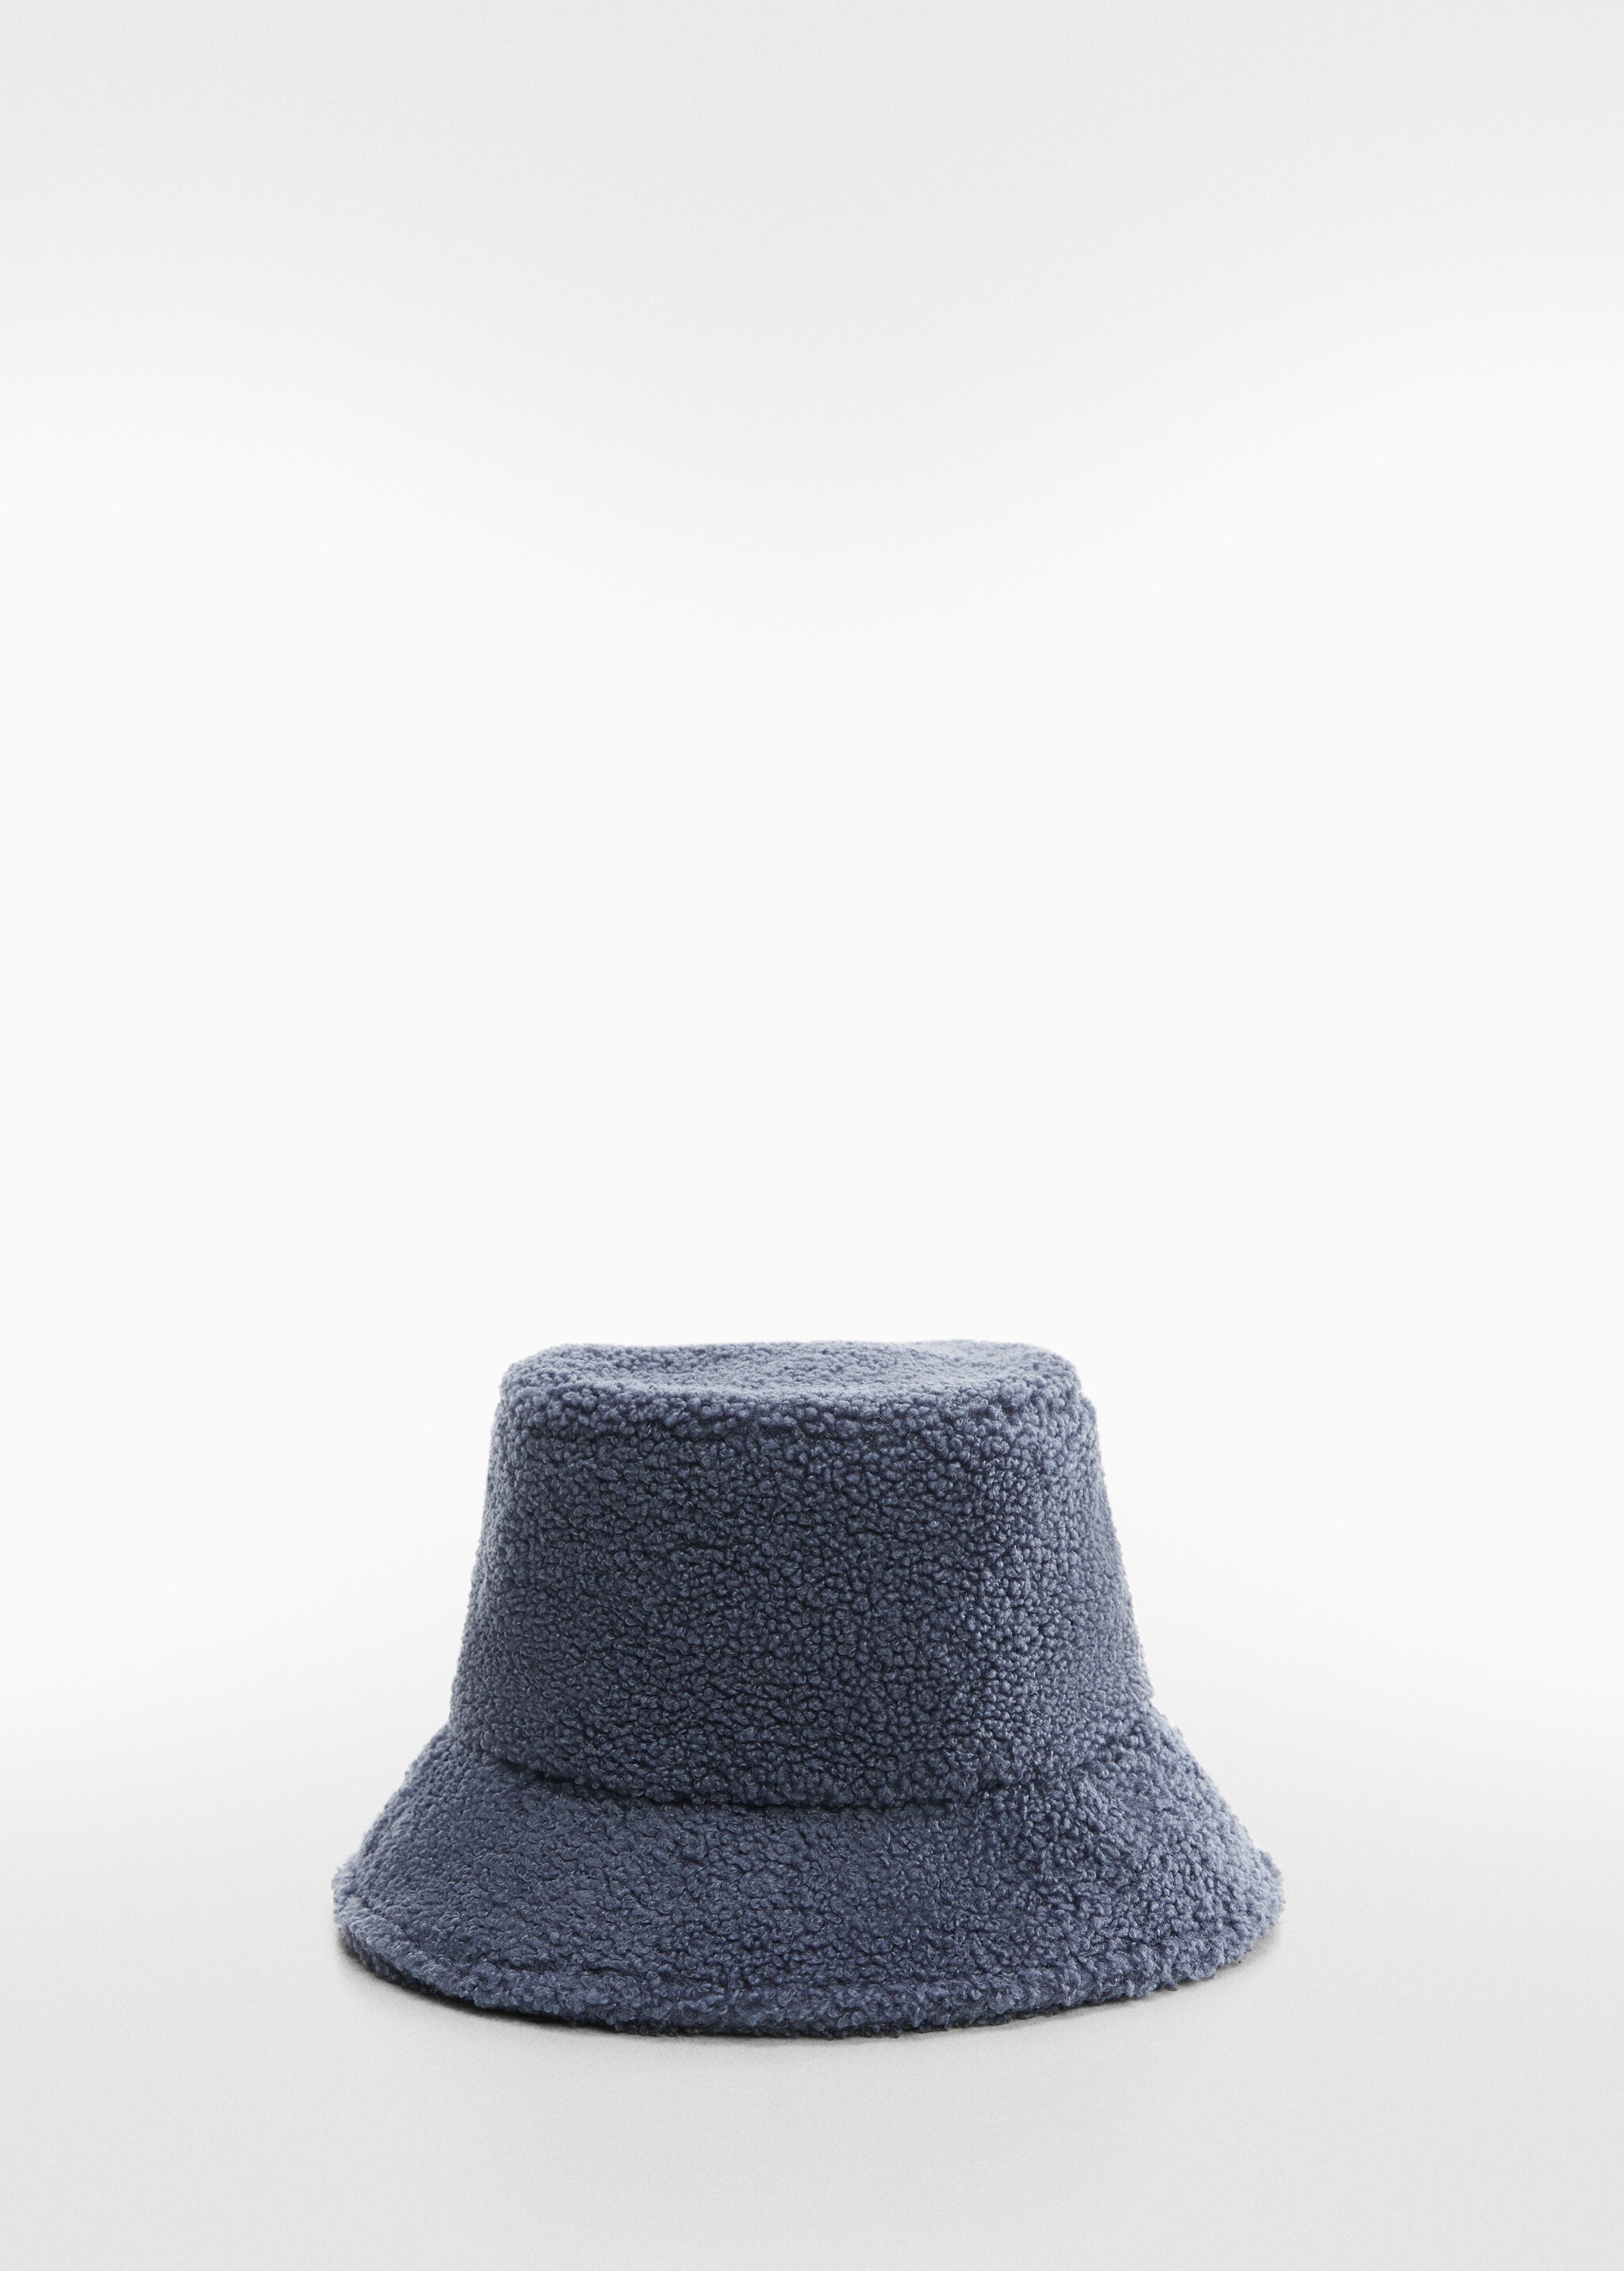 Shearling bucket hat - Article without model